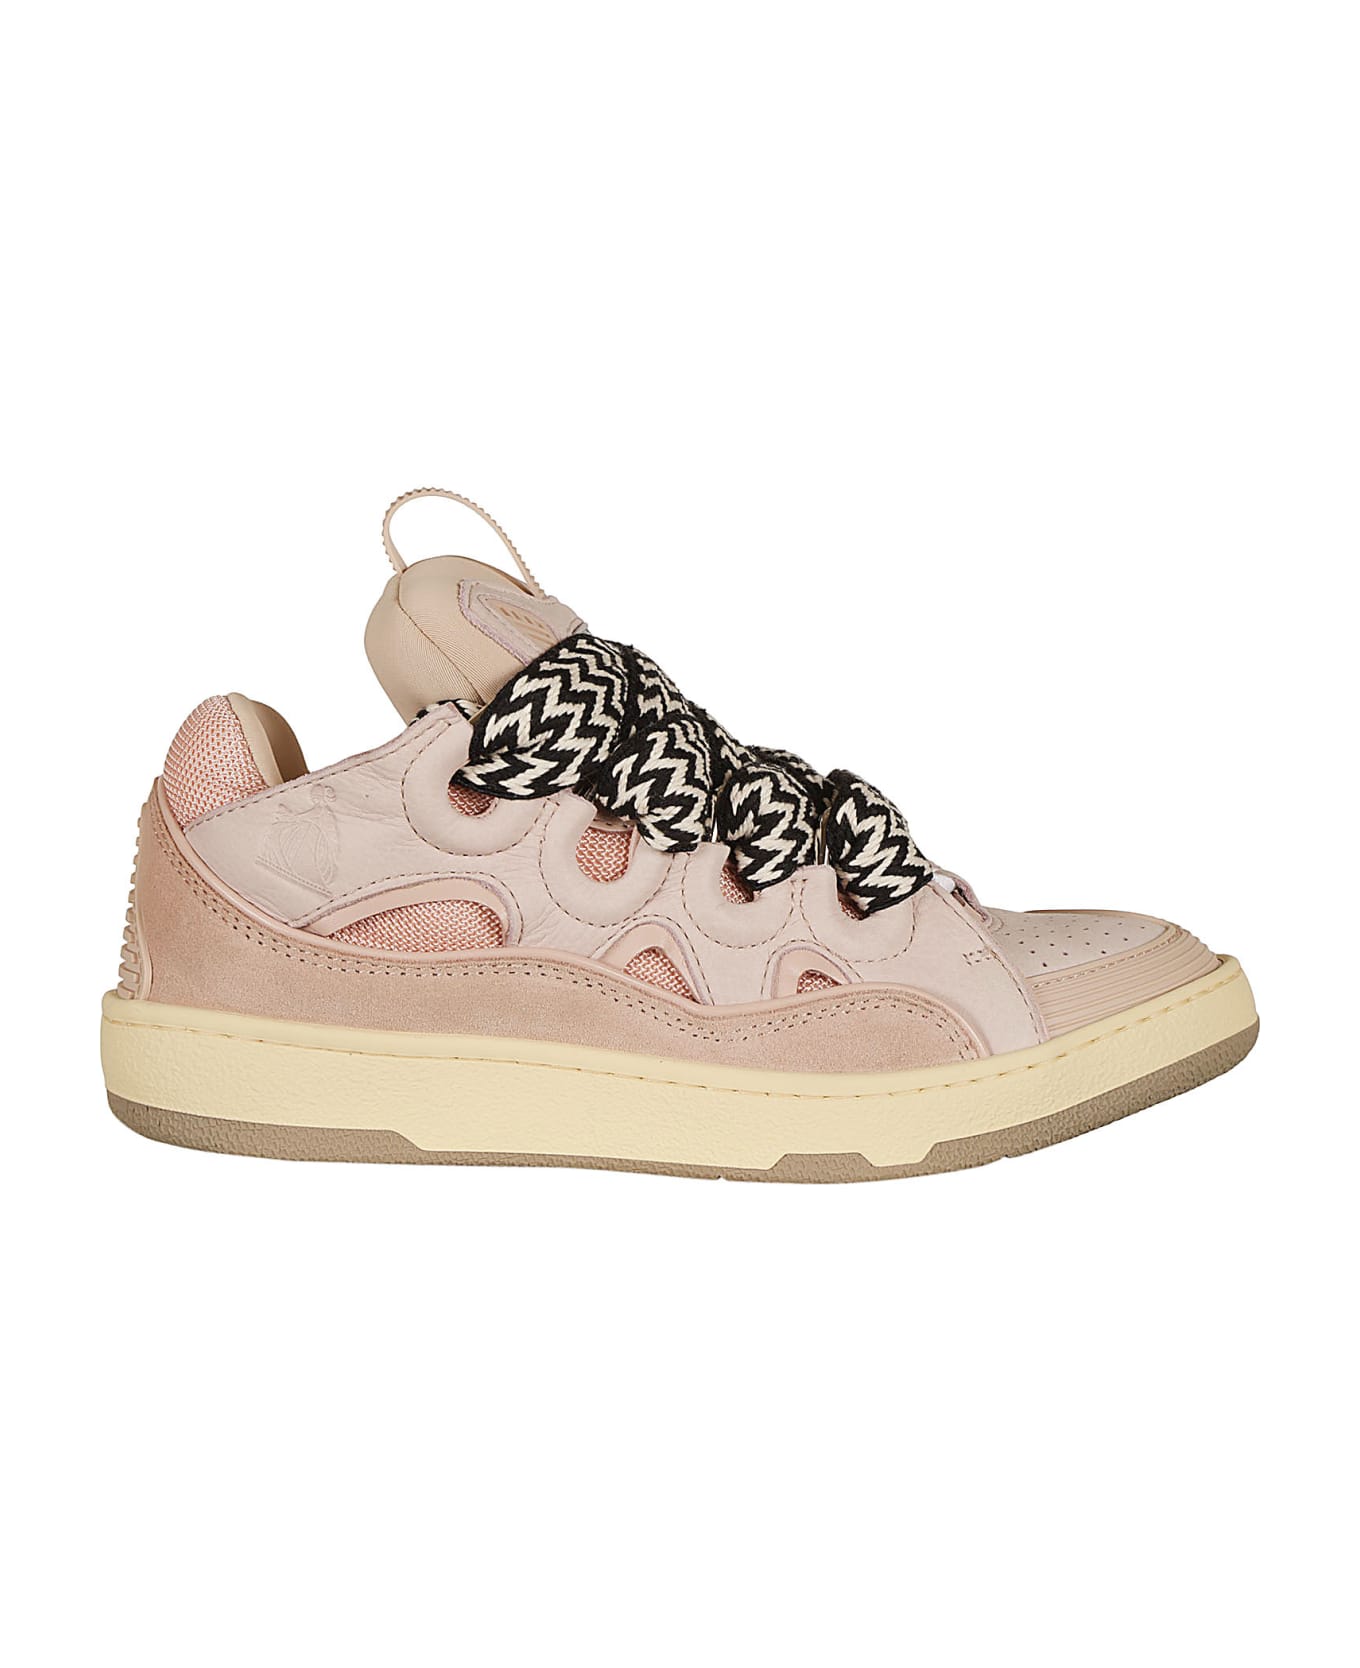 Lanvin Curb Sneakers - Pale Pink